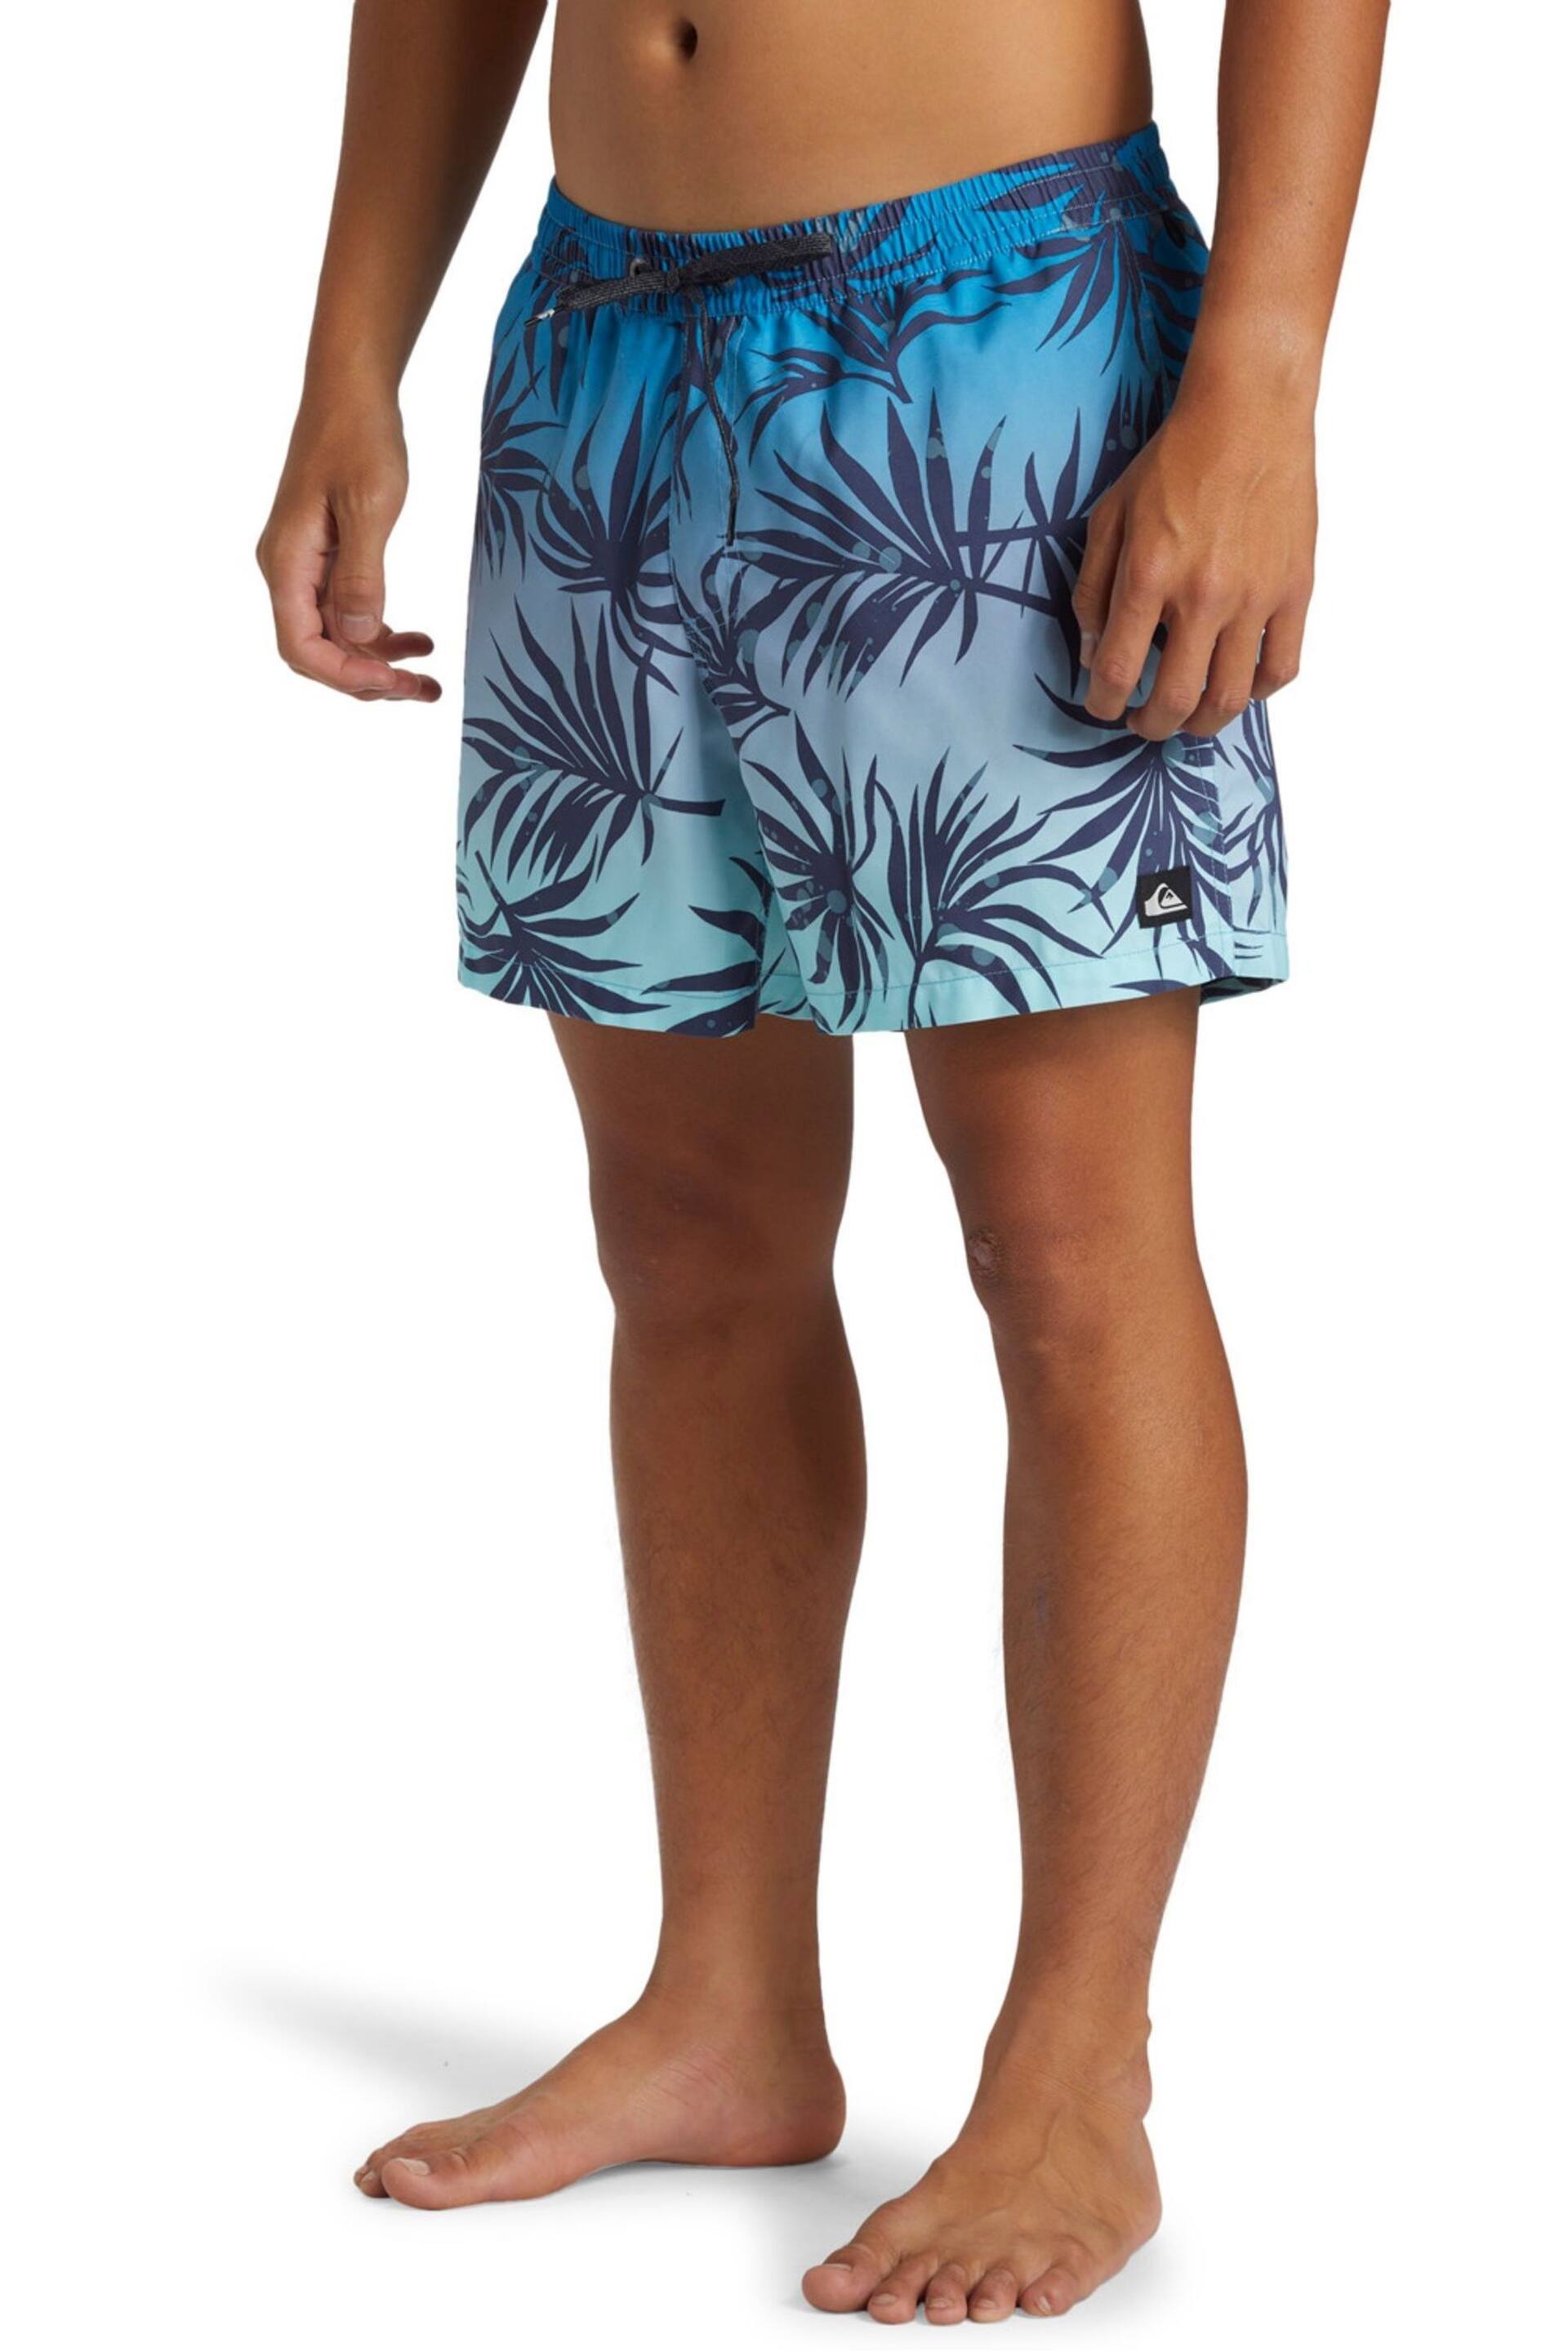 Quiksilver Blue Gradient Leaf Print Volley Shorts - Image 3 of 7